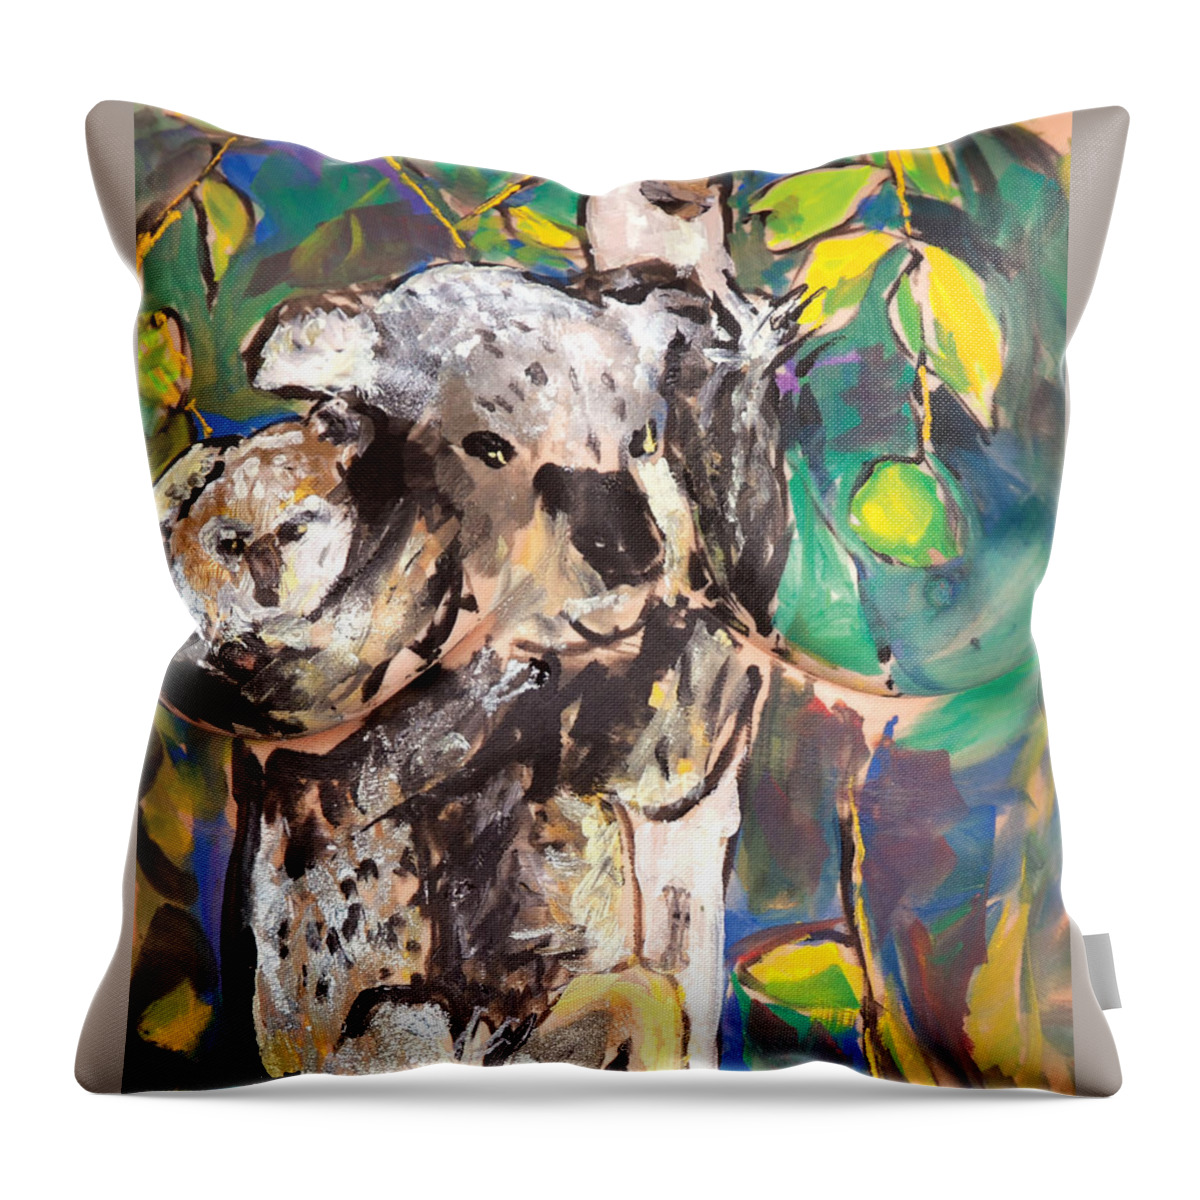 Hadassah Greater Atlanta Throw Pillow featuring the photograph 10. Joyce English, 2016 by Best Strokes - Formerly Breast Strokes - Hadassah Greater Atlanta